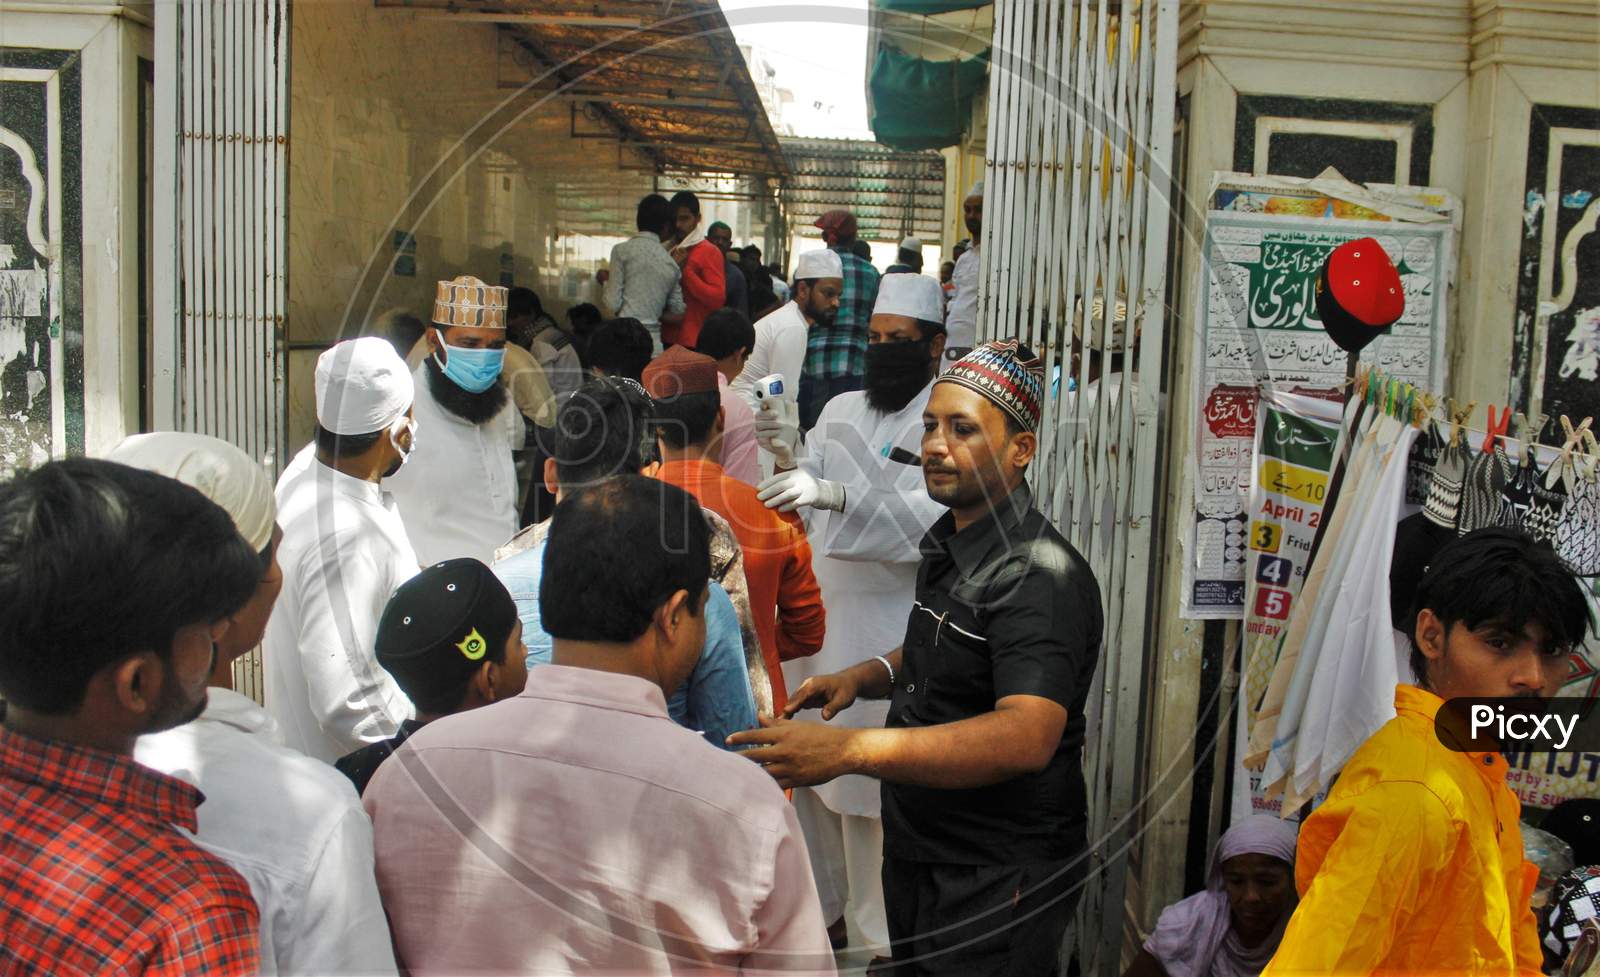 Devotees stand in a queue to gets themselves scanned with an infrared thermometer to check their temperatures as a precautionary measure against coronavirus disease (COVID-19), outside a mosque, in Mumbai, India on March 20, 2020.